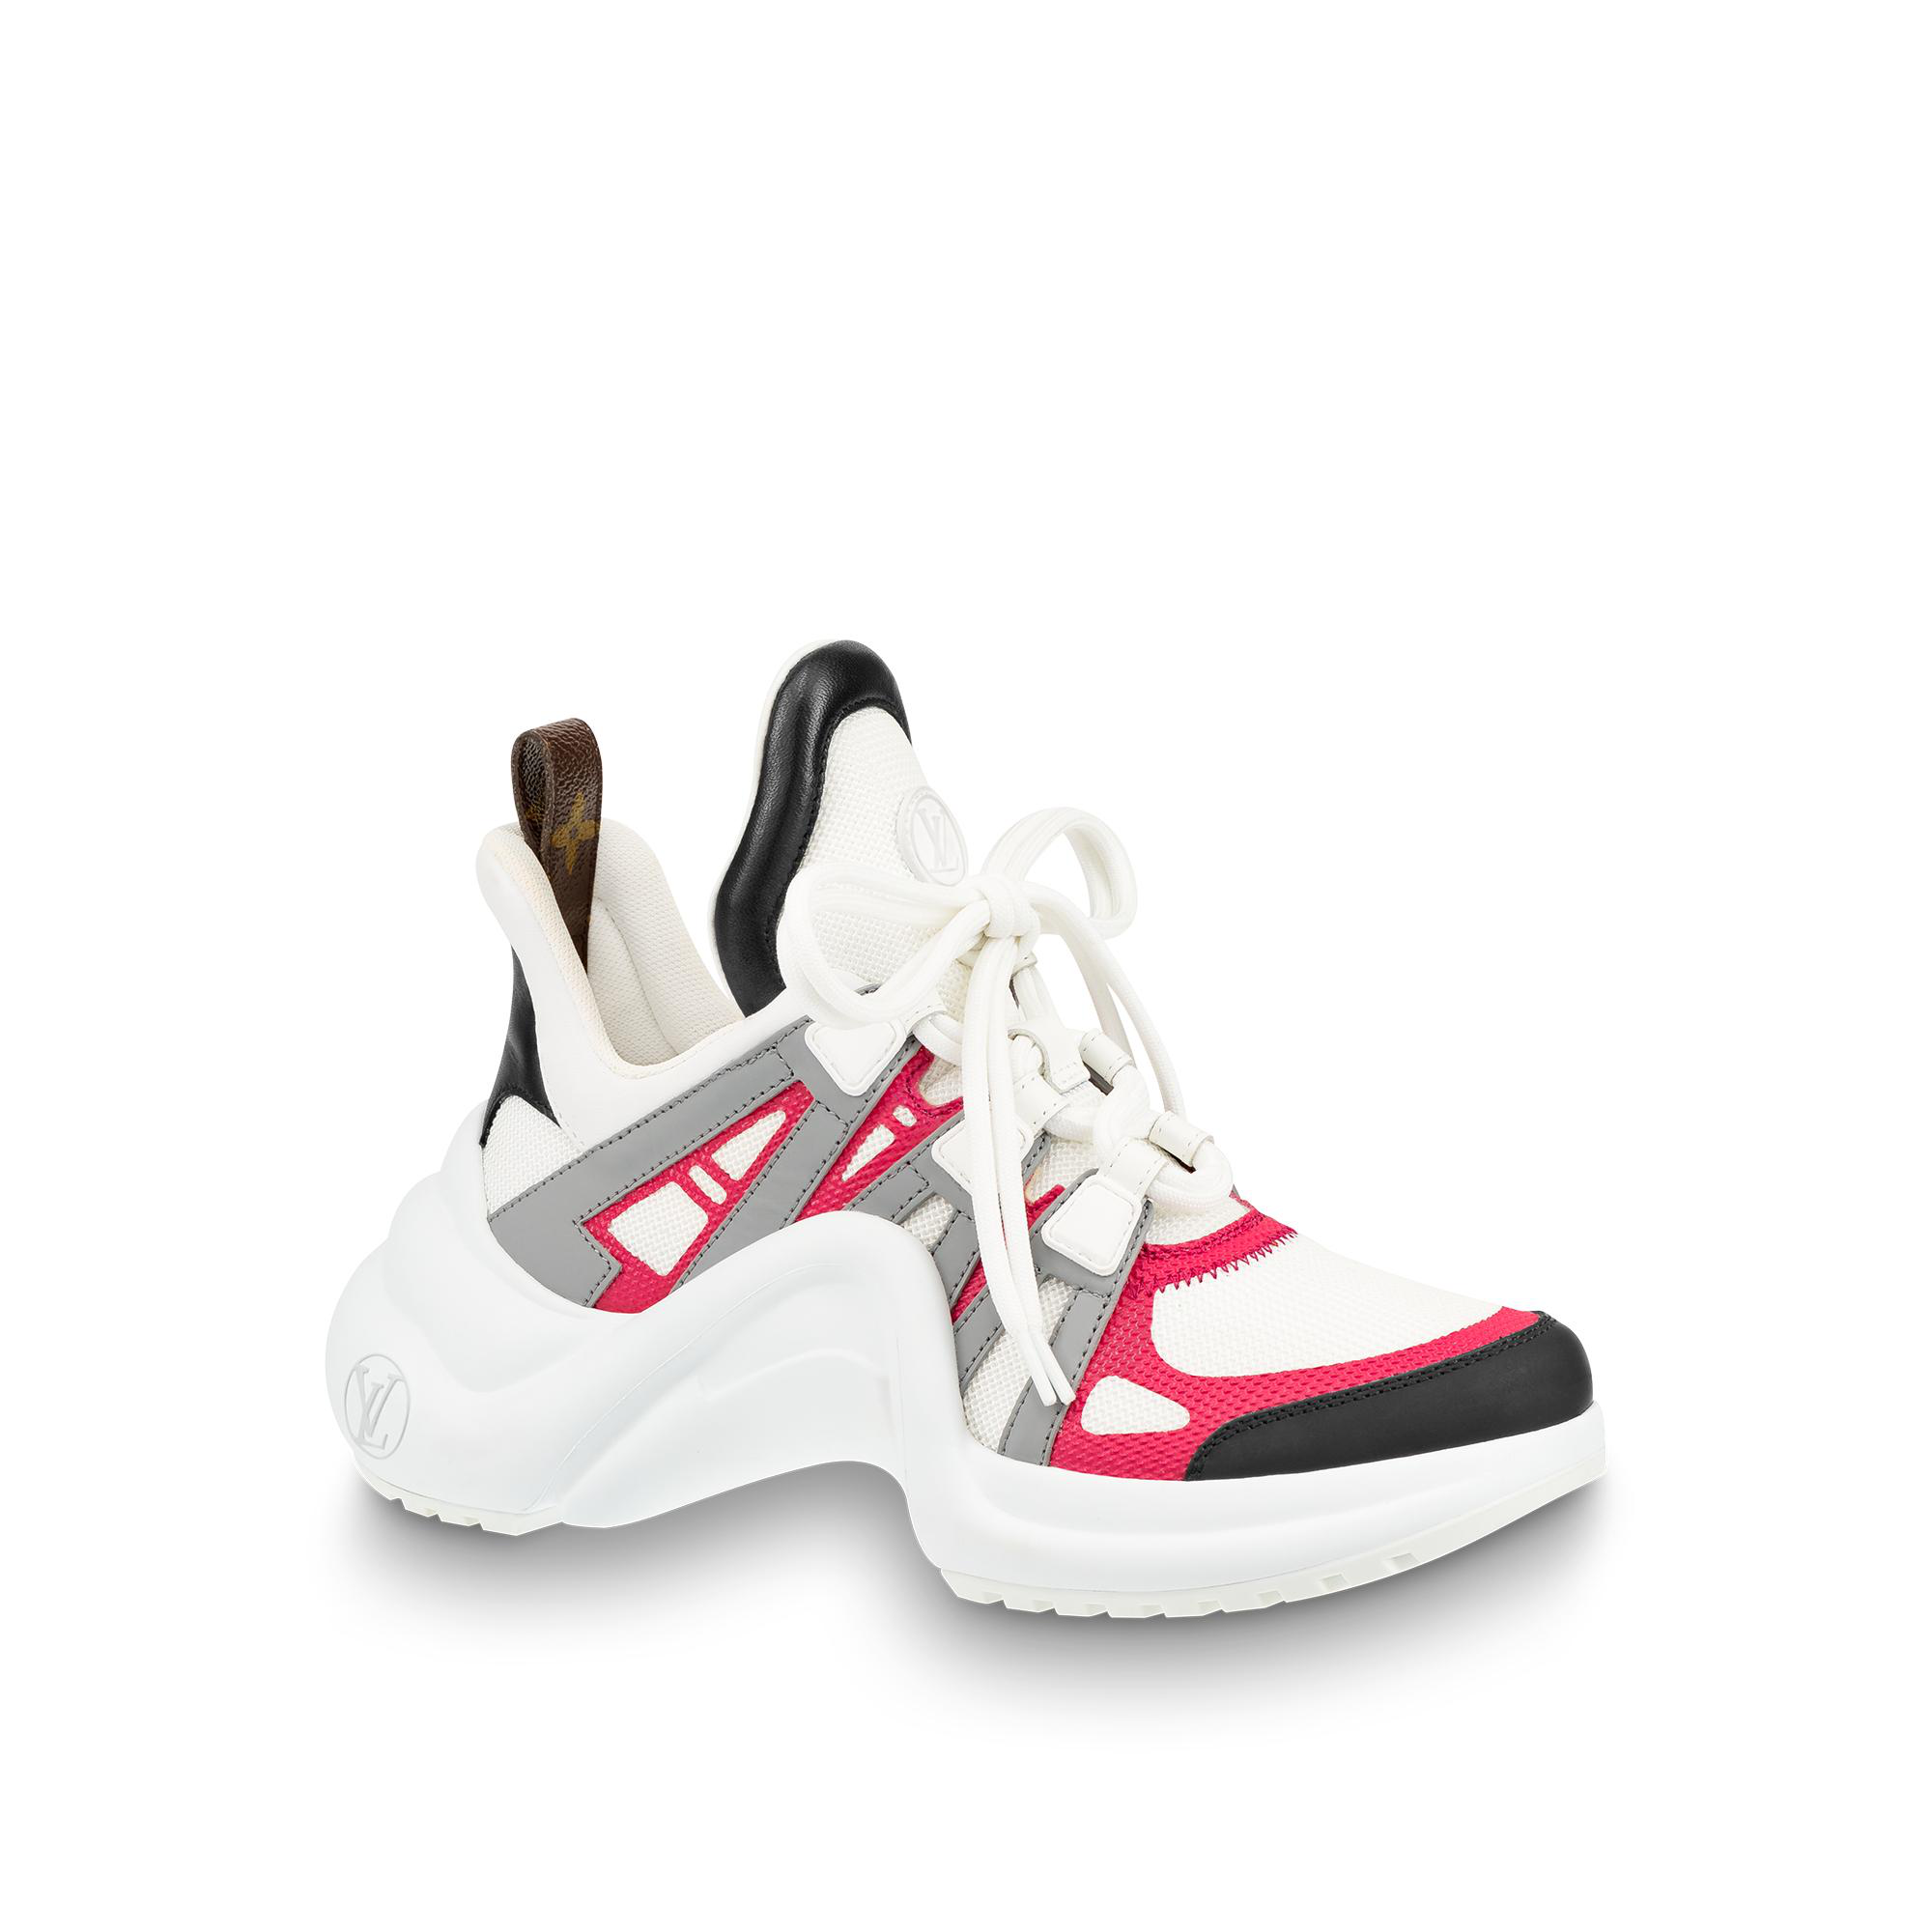 Lv Archlight Sneakers Price | Confederated Tribes of the Umatilla Indian Reservation